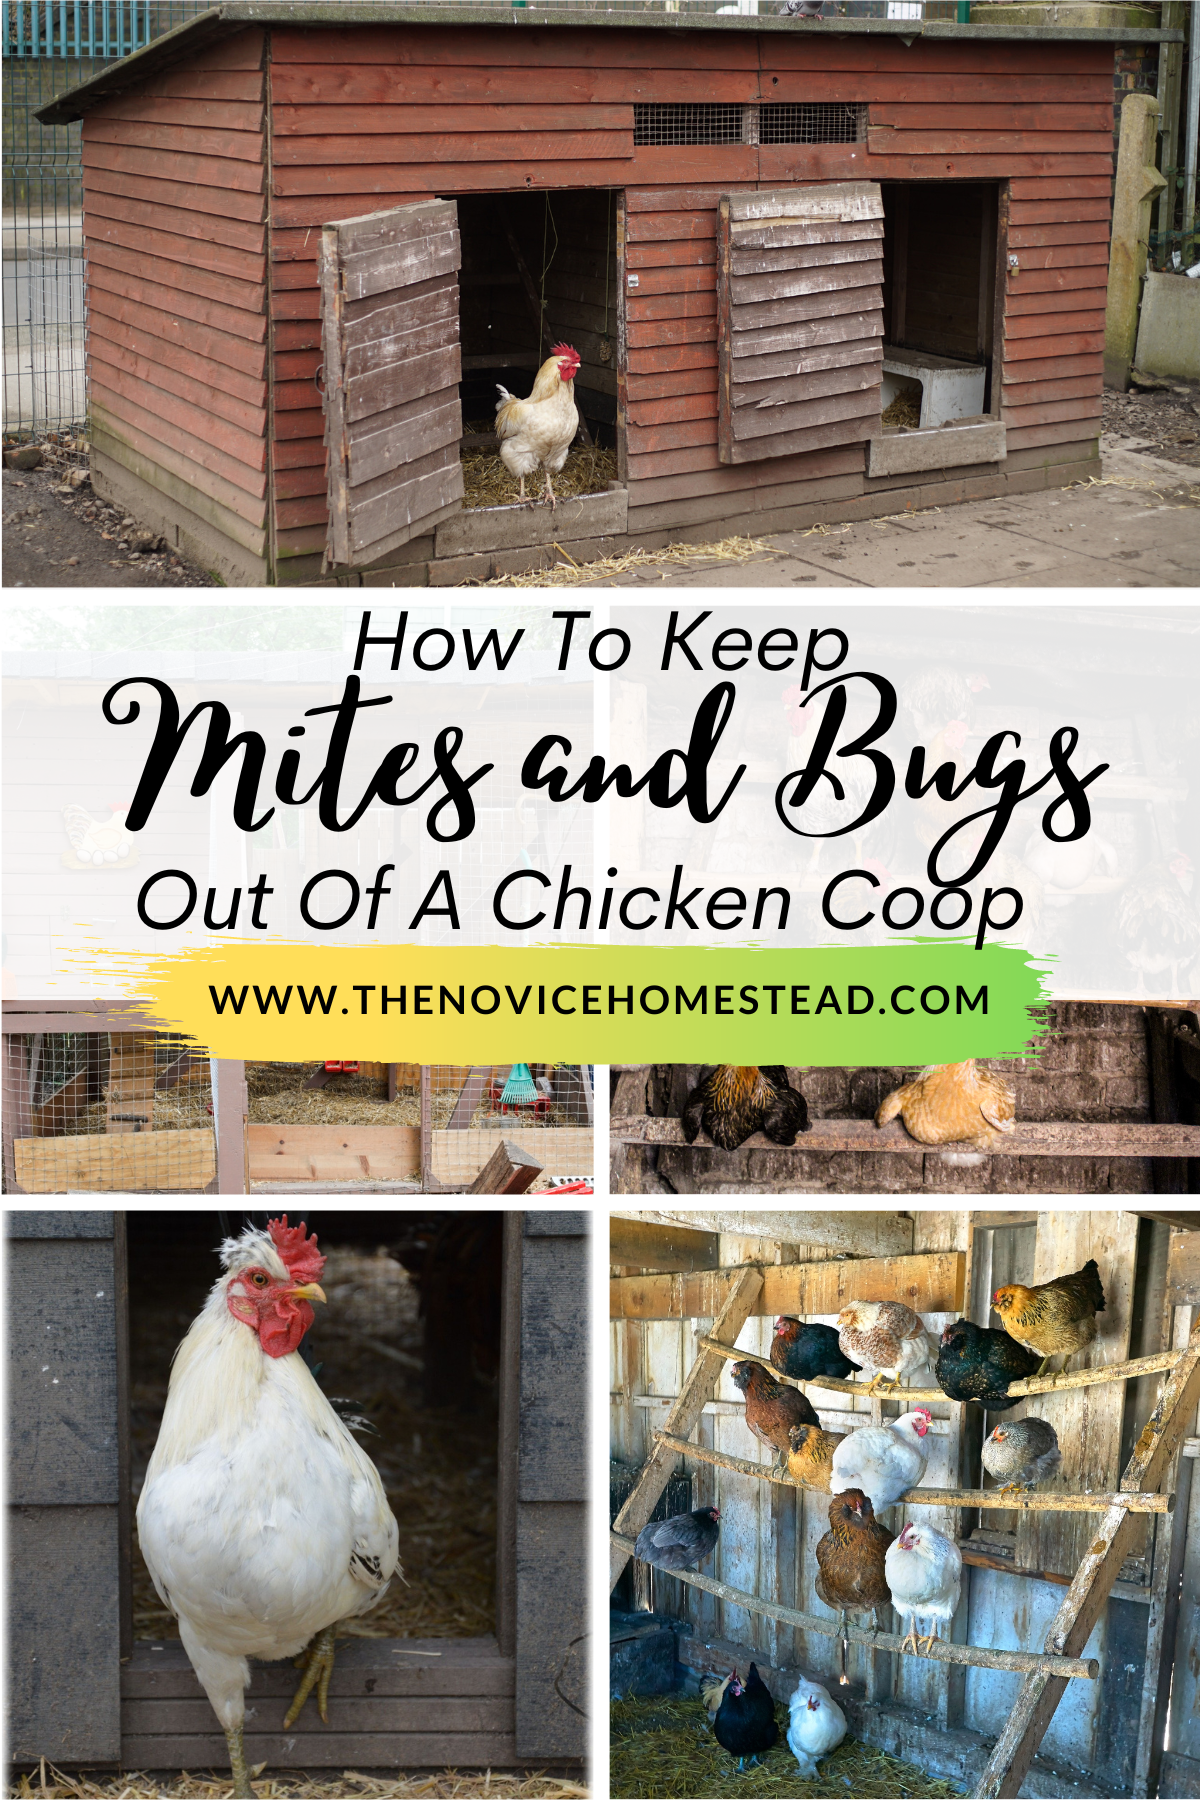 collage image of chicken photos and coop photos; text overlay "How to Keep Mites and Bugs Out of a Chicken Coop"